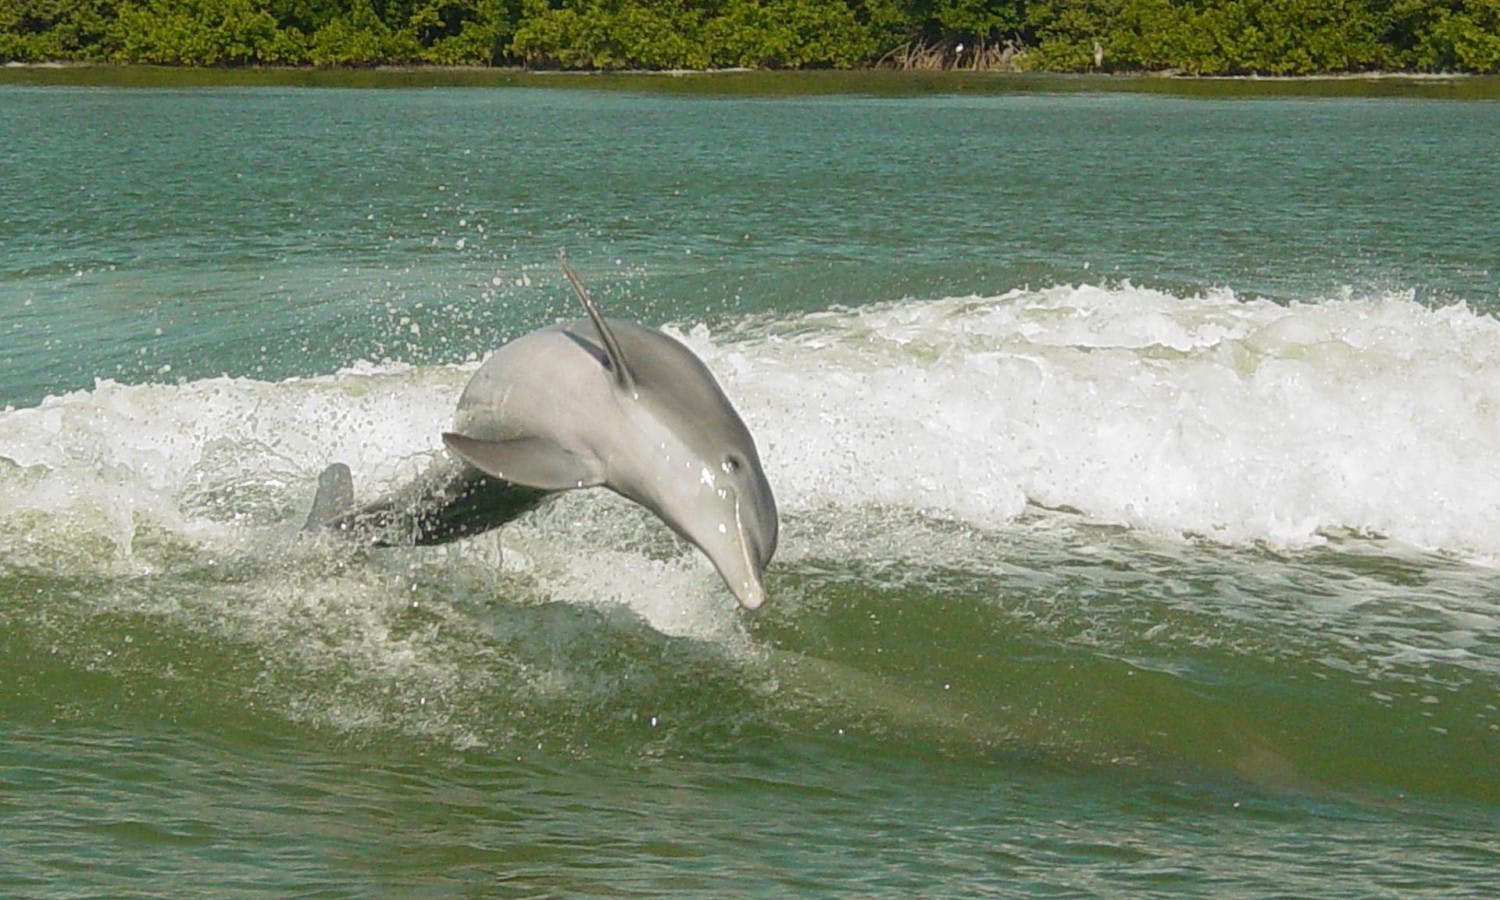 dolphins - clearwater beach - orlando - jumping.jpg